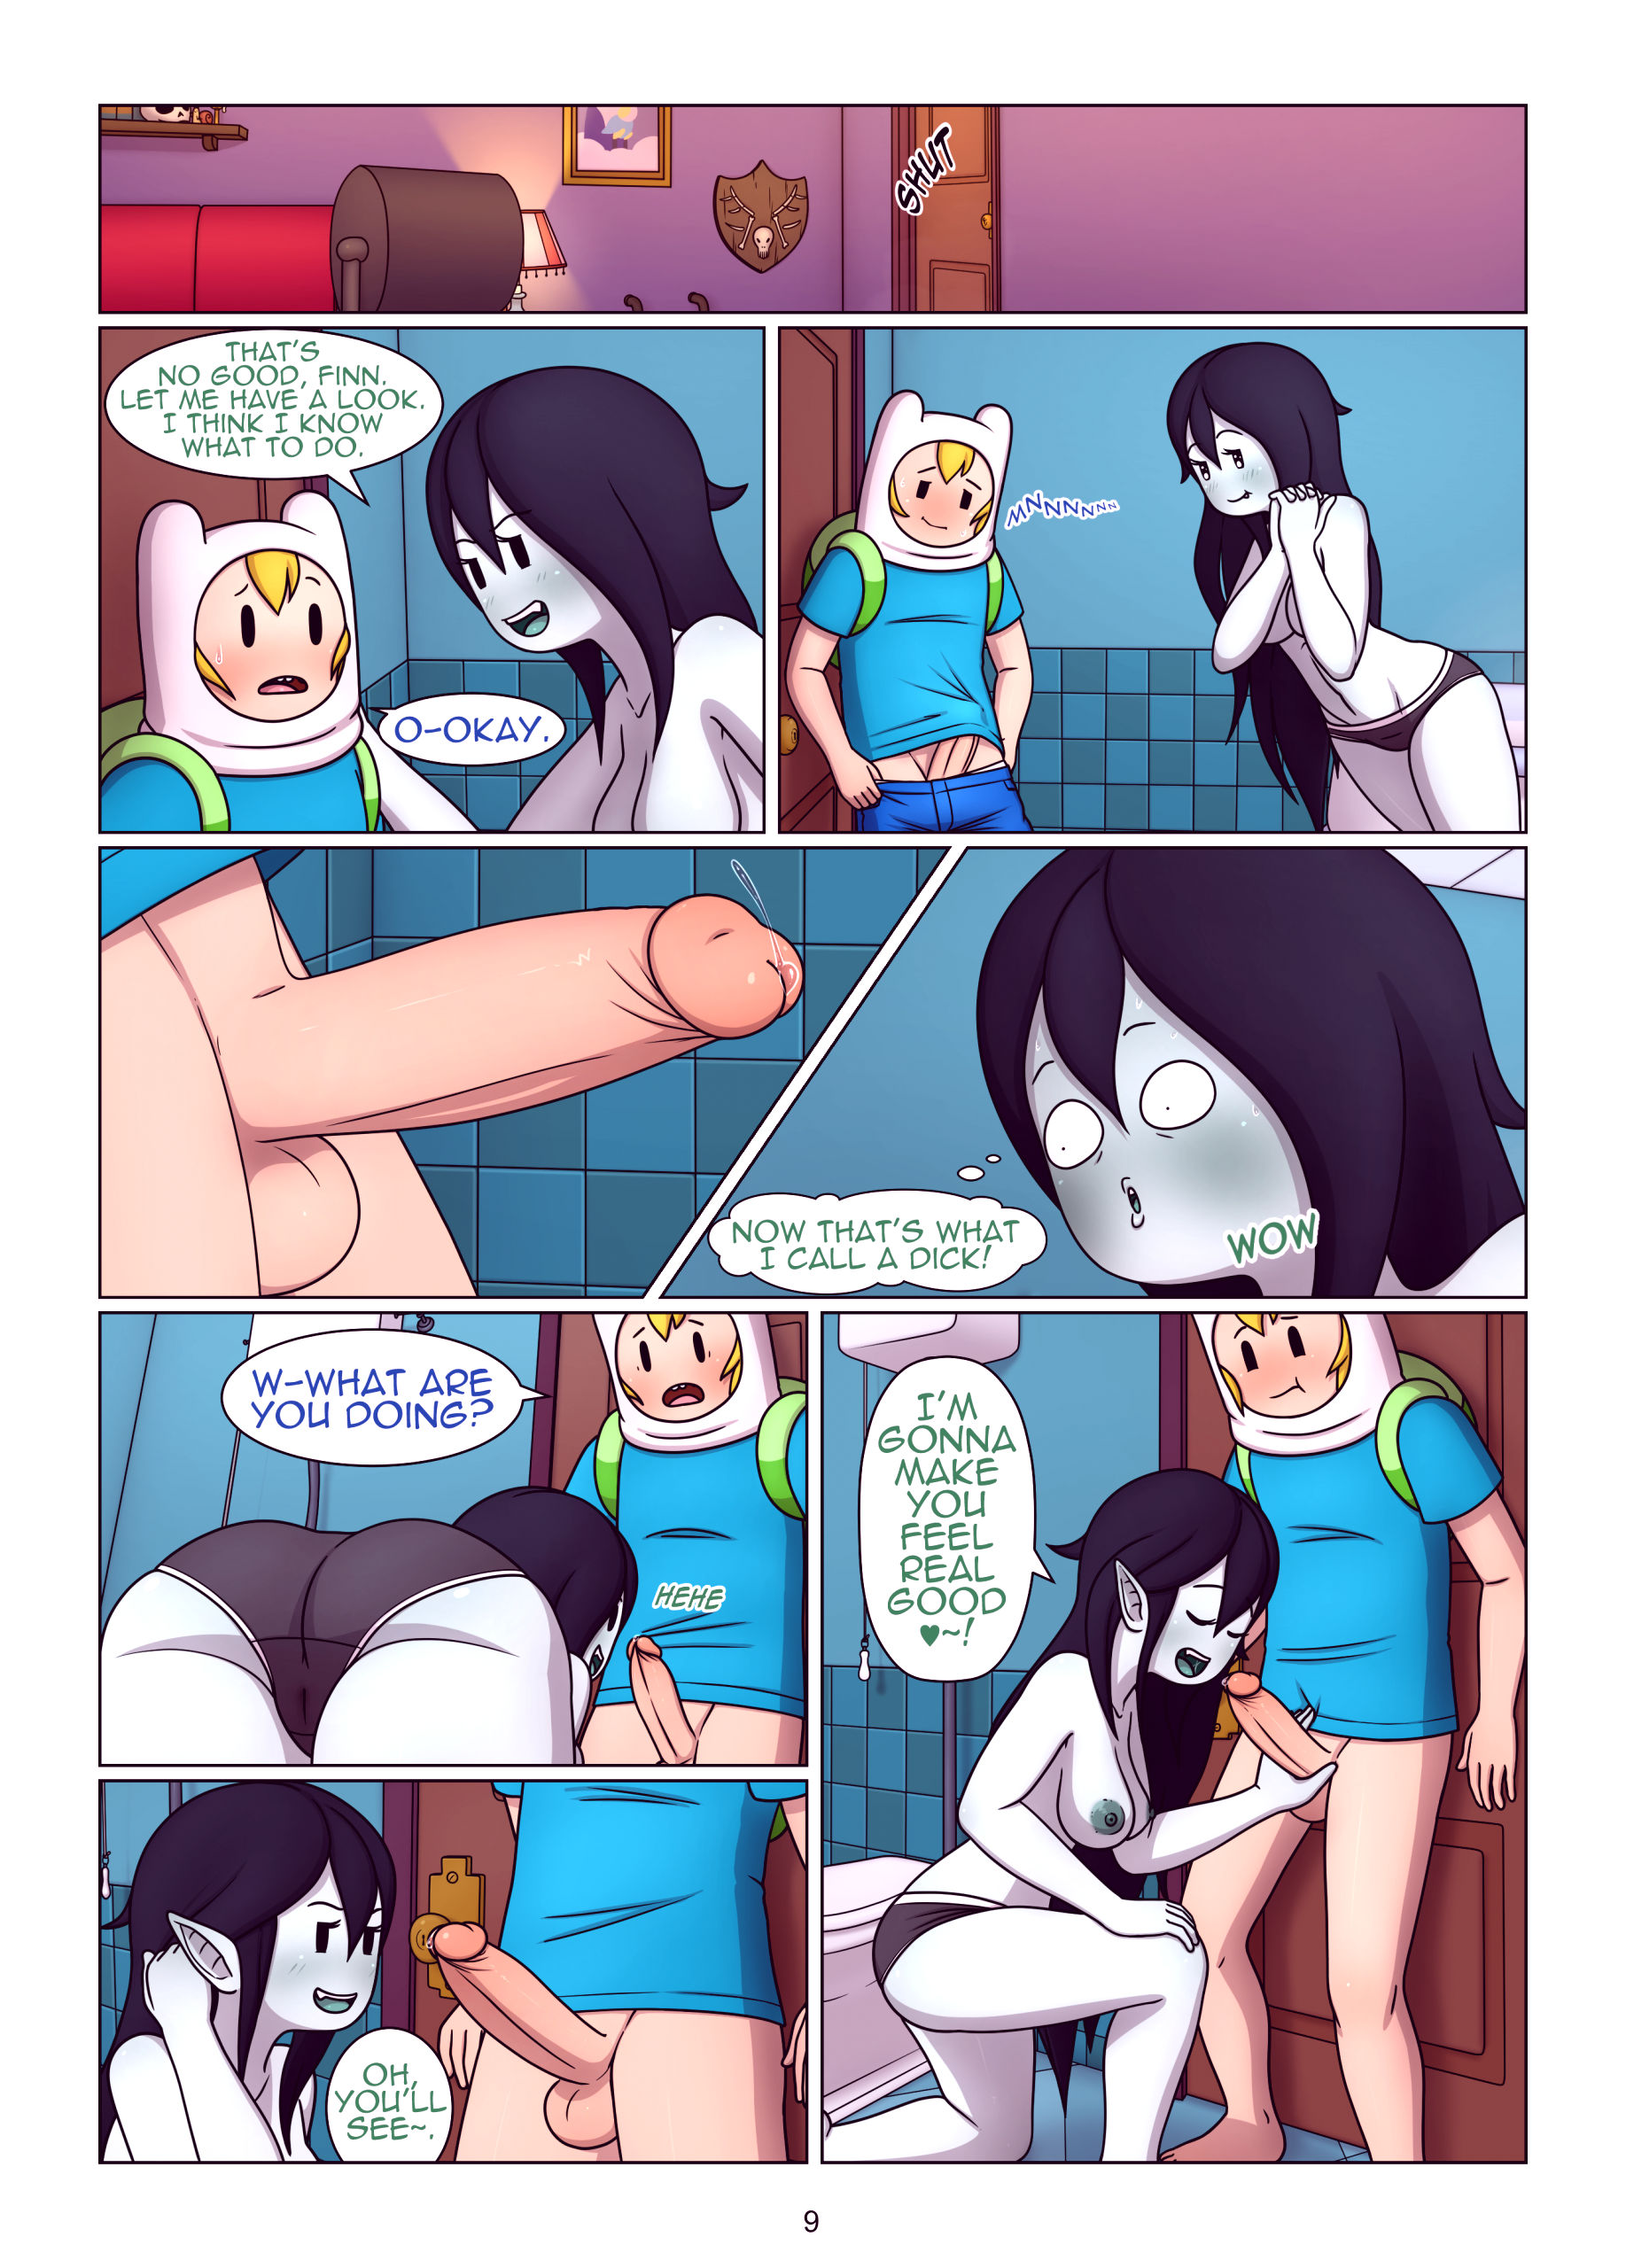 Misadventure time the collection porn comic picture 10.